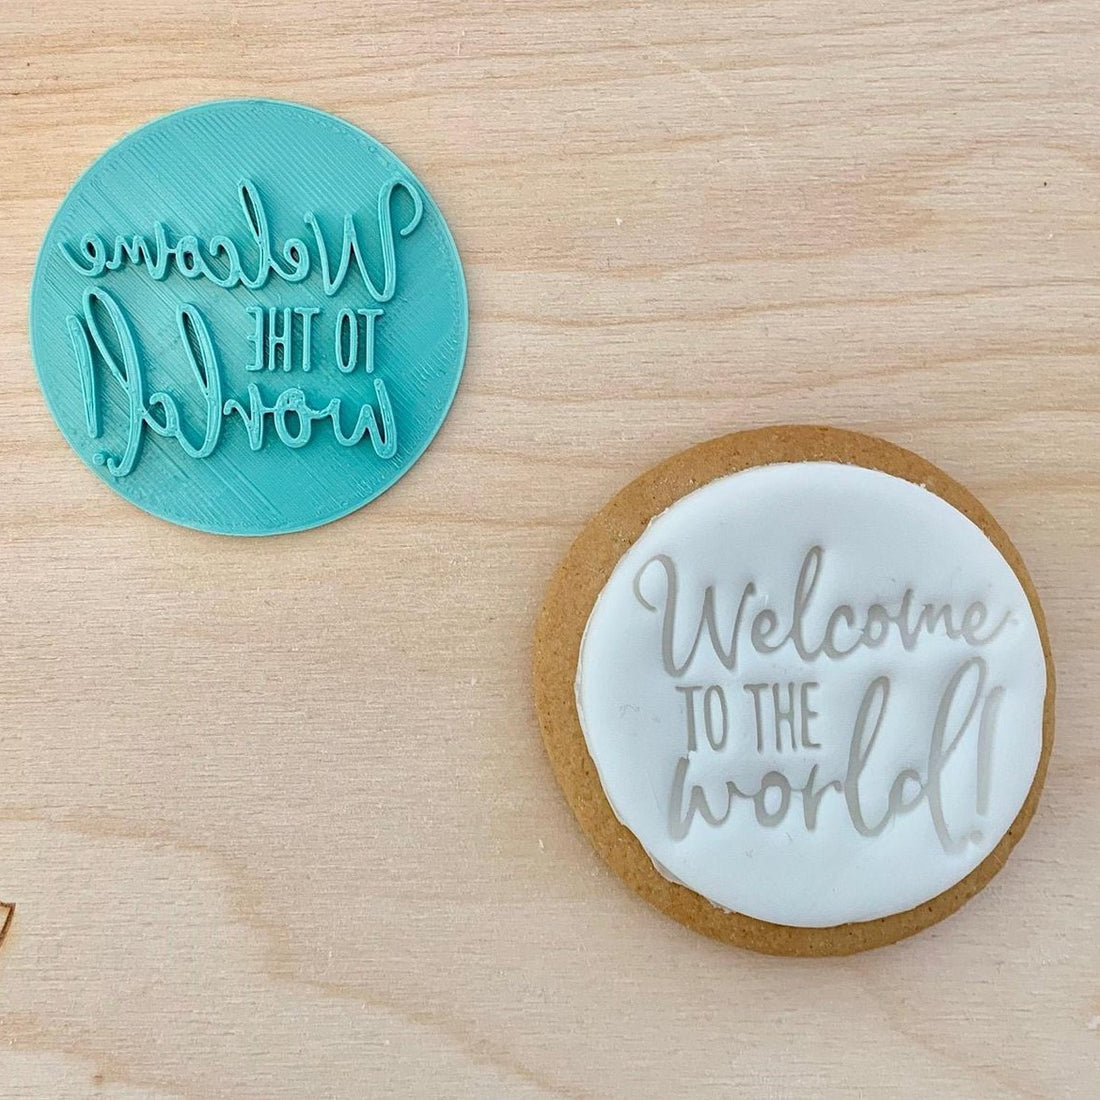 Welcome To The World Cookie Embosser Stamp